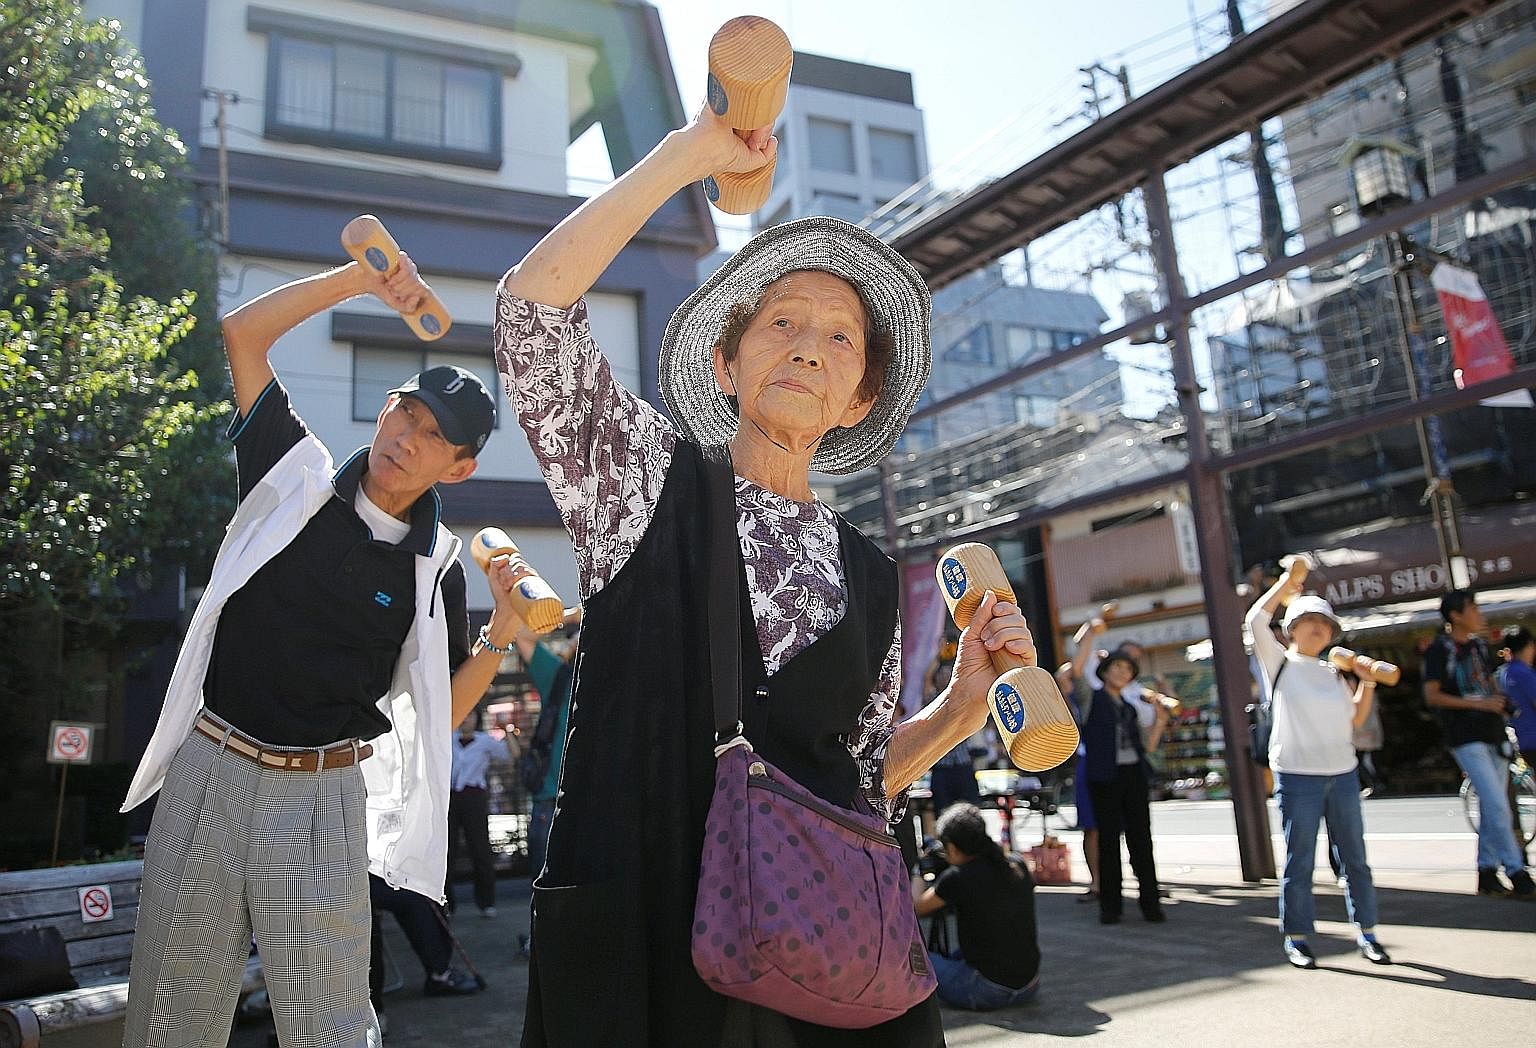 Japan is on track to soon become the world's first "ultra-aged" country, defined by 28 per cent of a population being over 65. The government is considering allowing people to start receiving their pension after they turn 70, an idea that stems from 